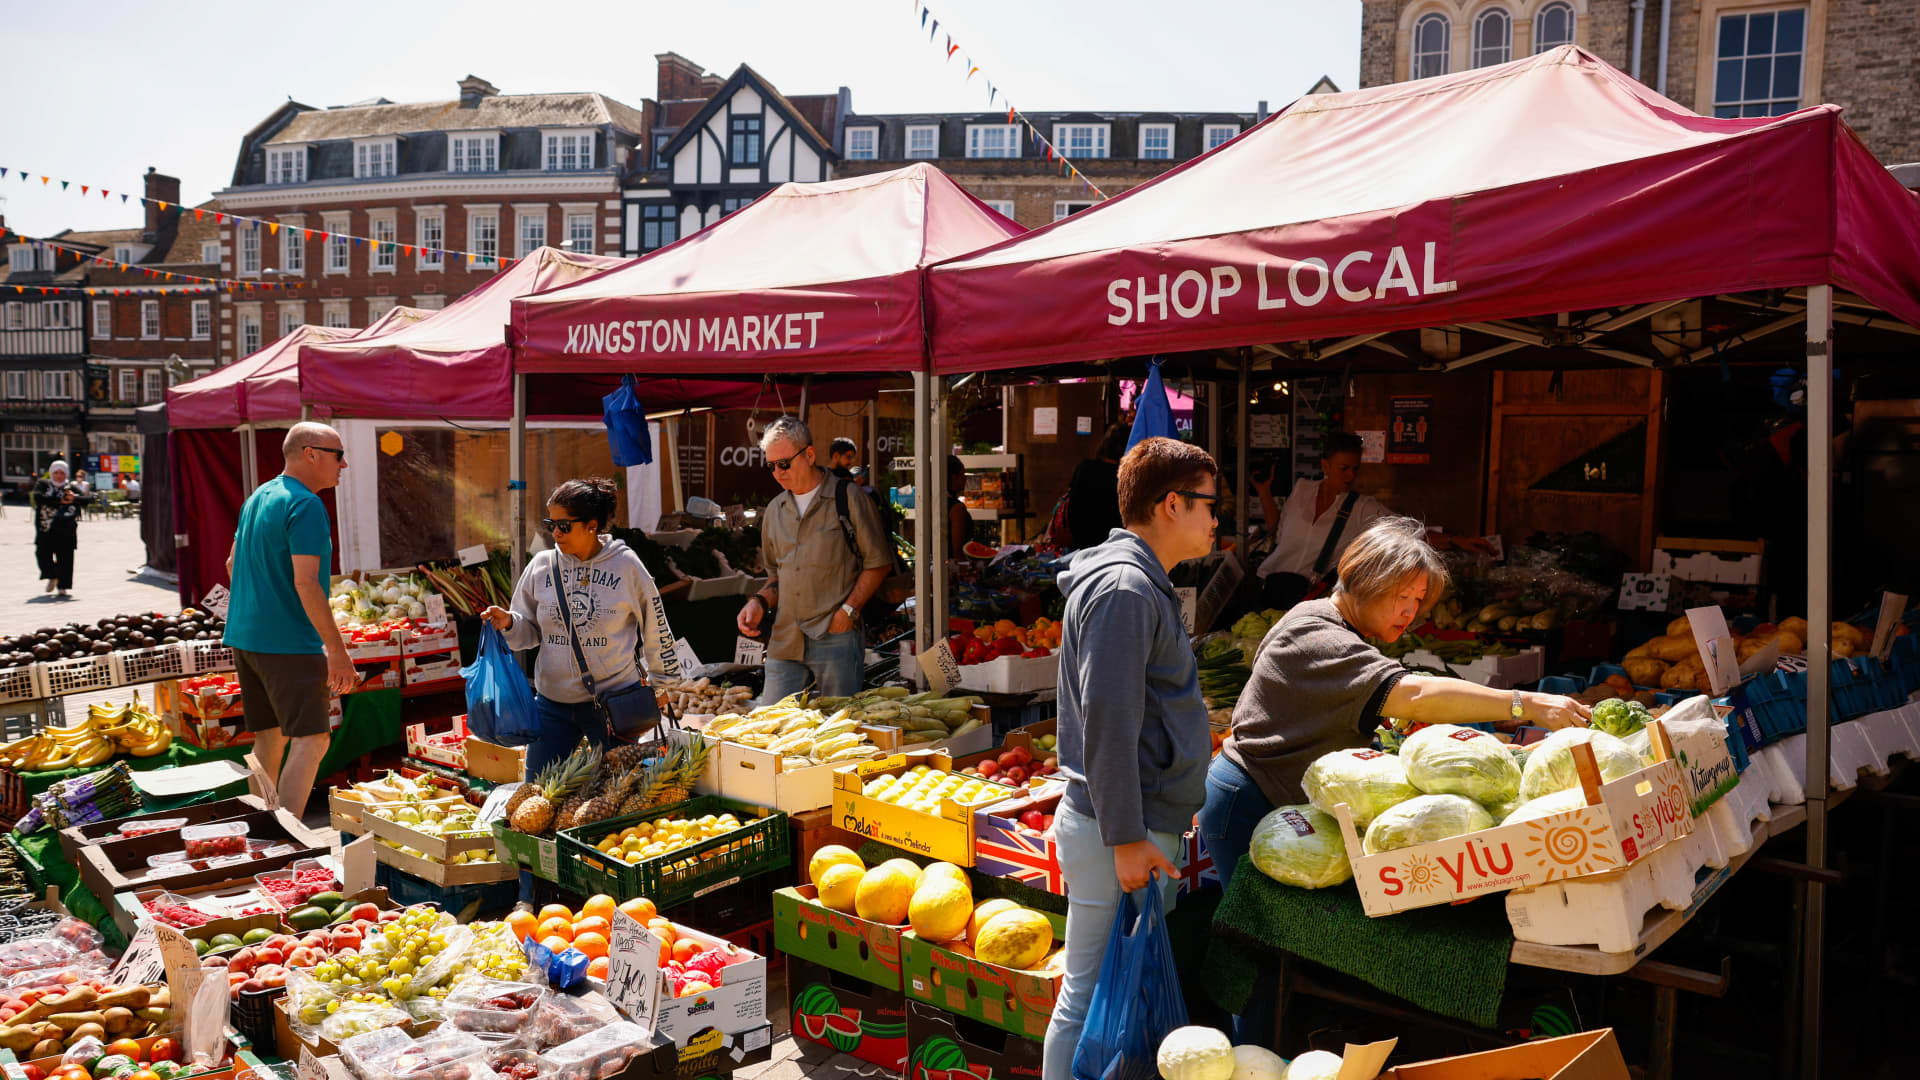 Britain's inflation rate could be about to drop below the Bank of England's 2% target